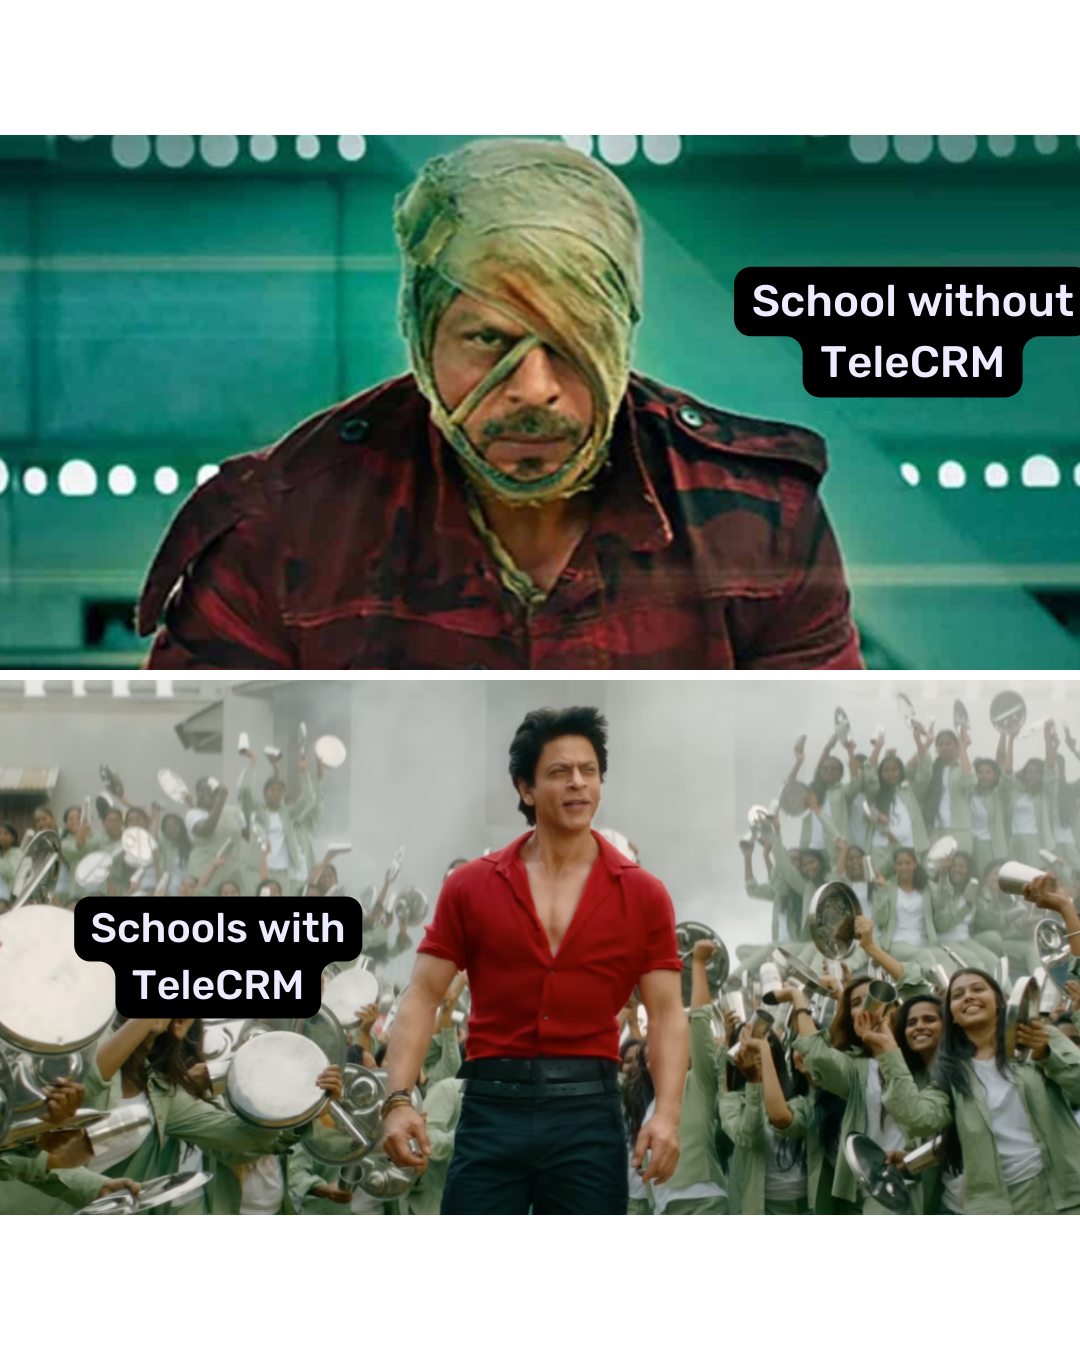 Schools without TeleCRM and School with TeleCRM. Comparative Meme. SRK. Jawan.